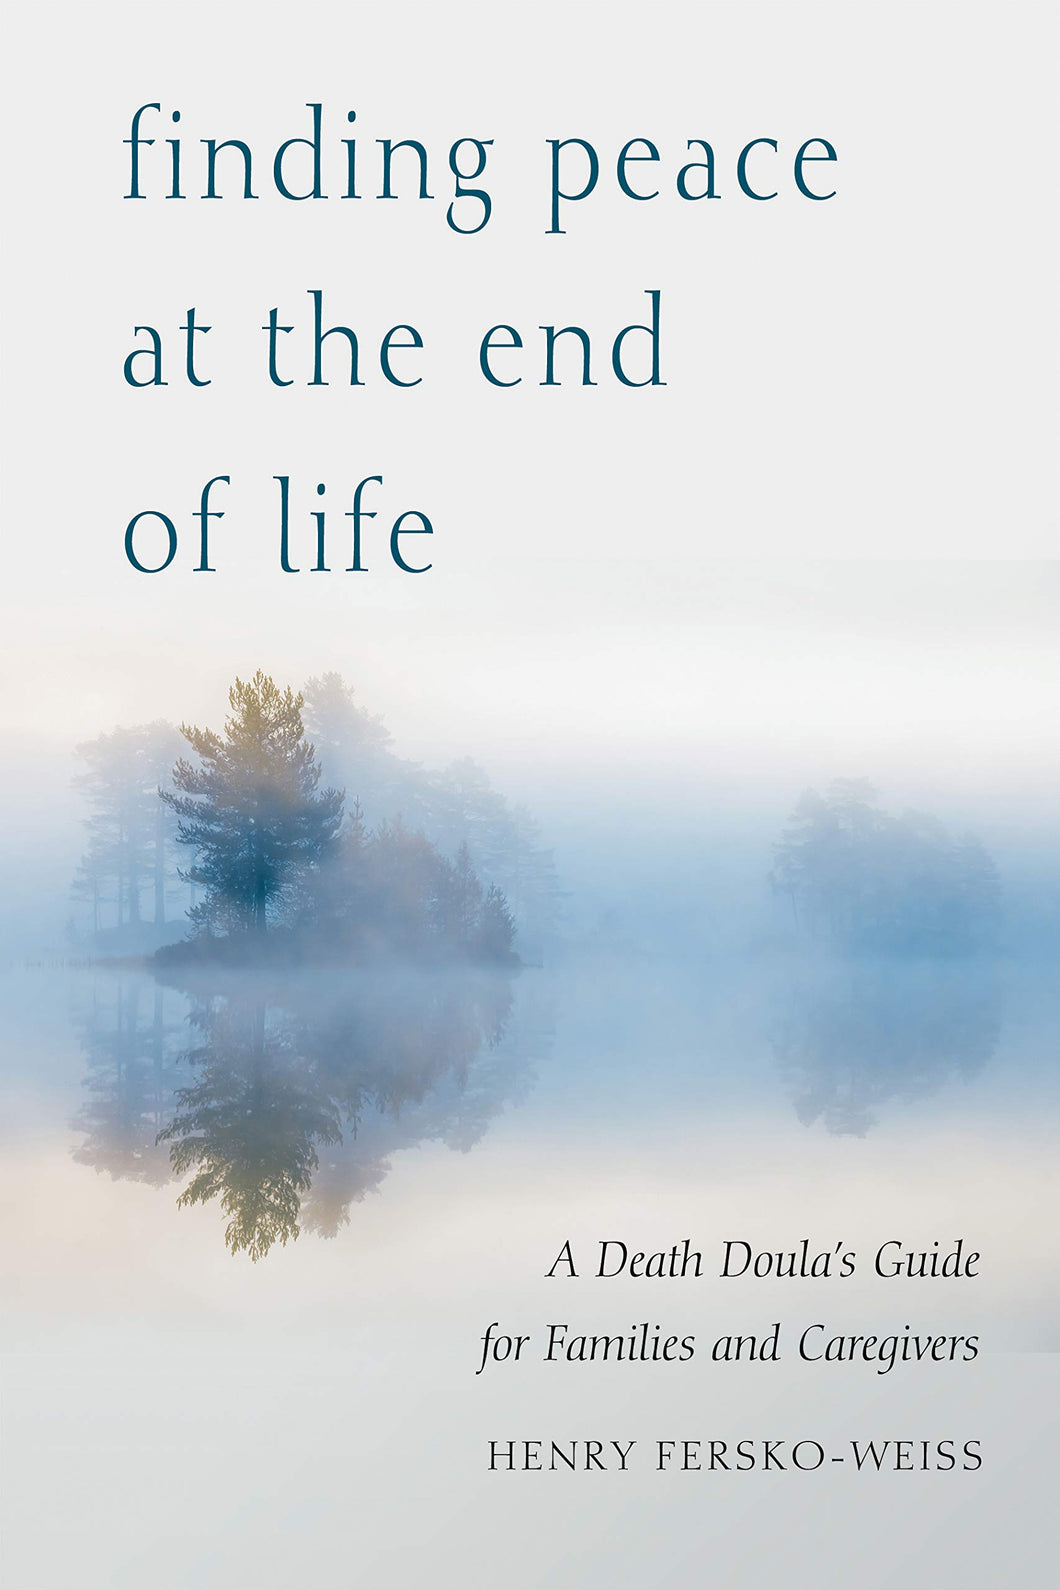 Finding Peace at the End of Life: A Death Doula's Guide for Families and Caregivers